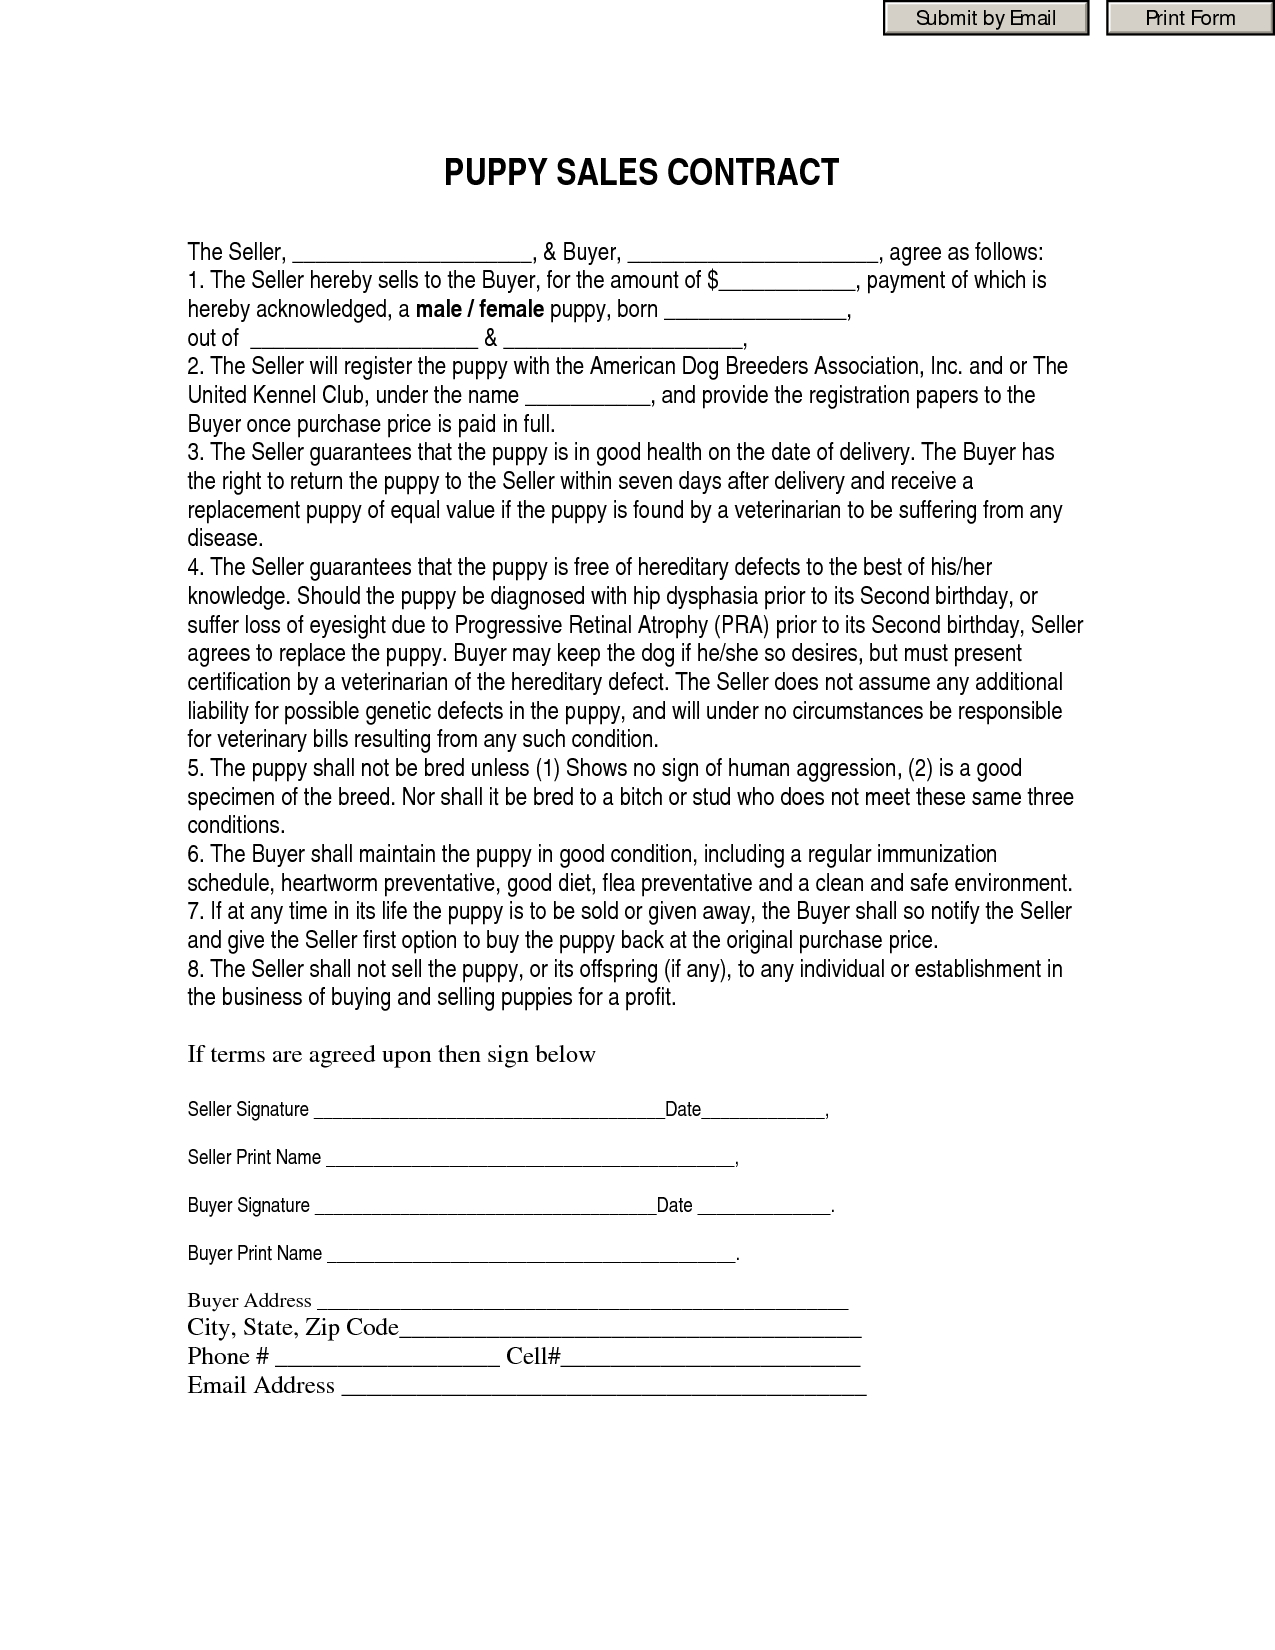 Gallery Of Sample Cover Letter For Real Estate Purchase Offer - Free Printable Puppy Sales Contract